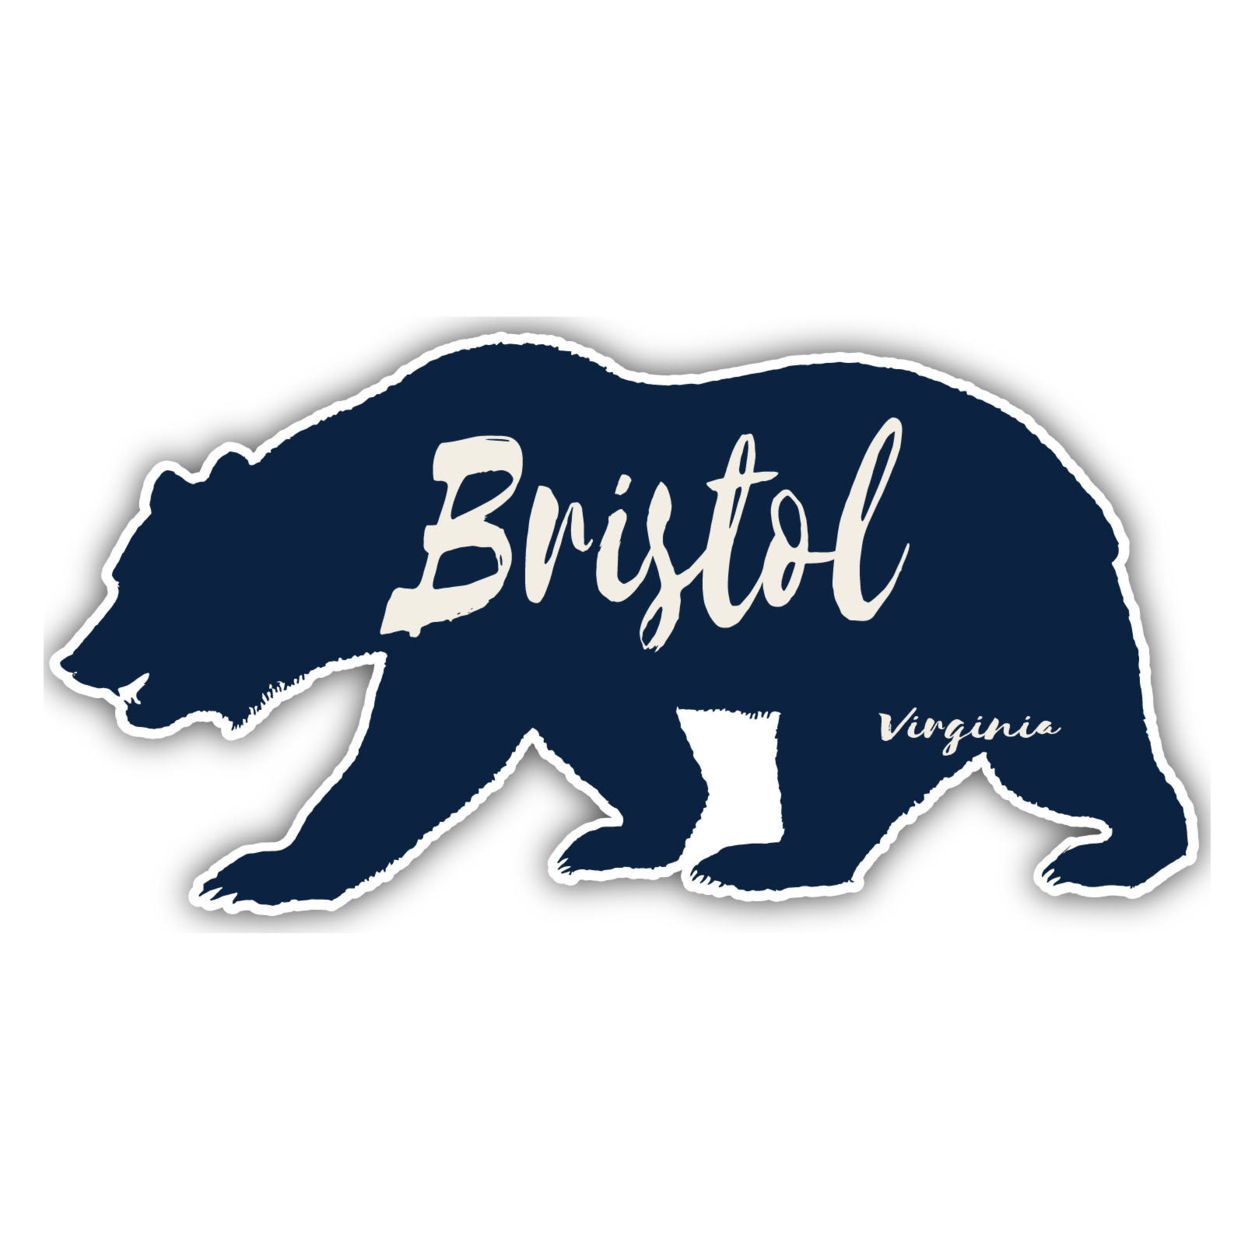 Bristol Virginia Souvenir Decorative Stickers (Choose Theme And Size) - 4-Pack, 4-Inch, Great Outdoors